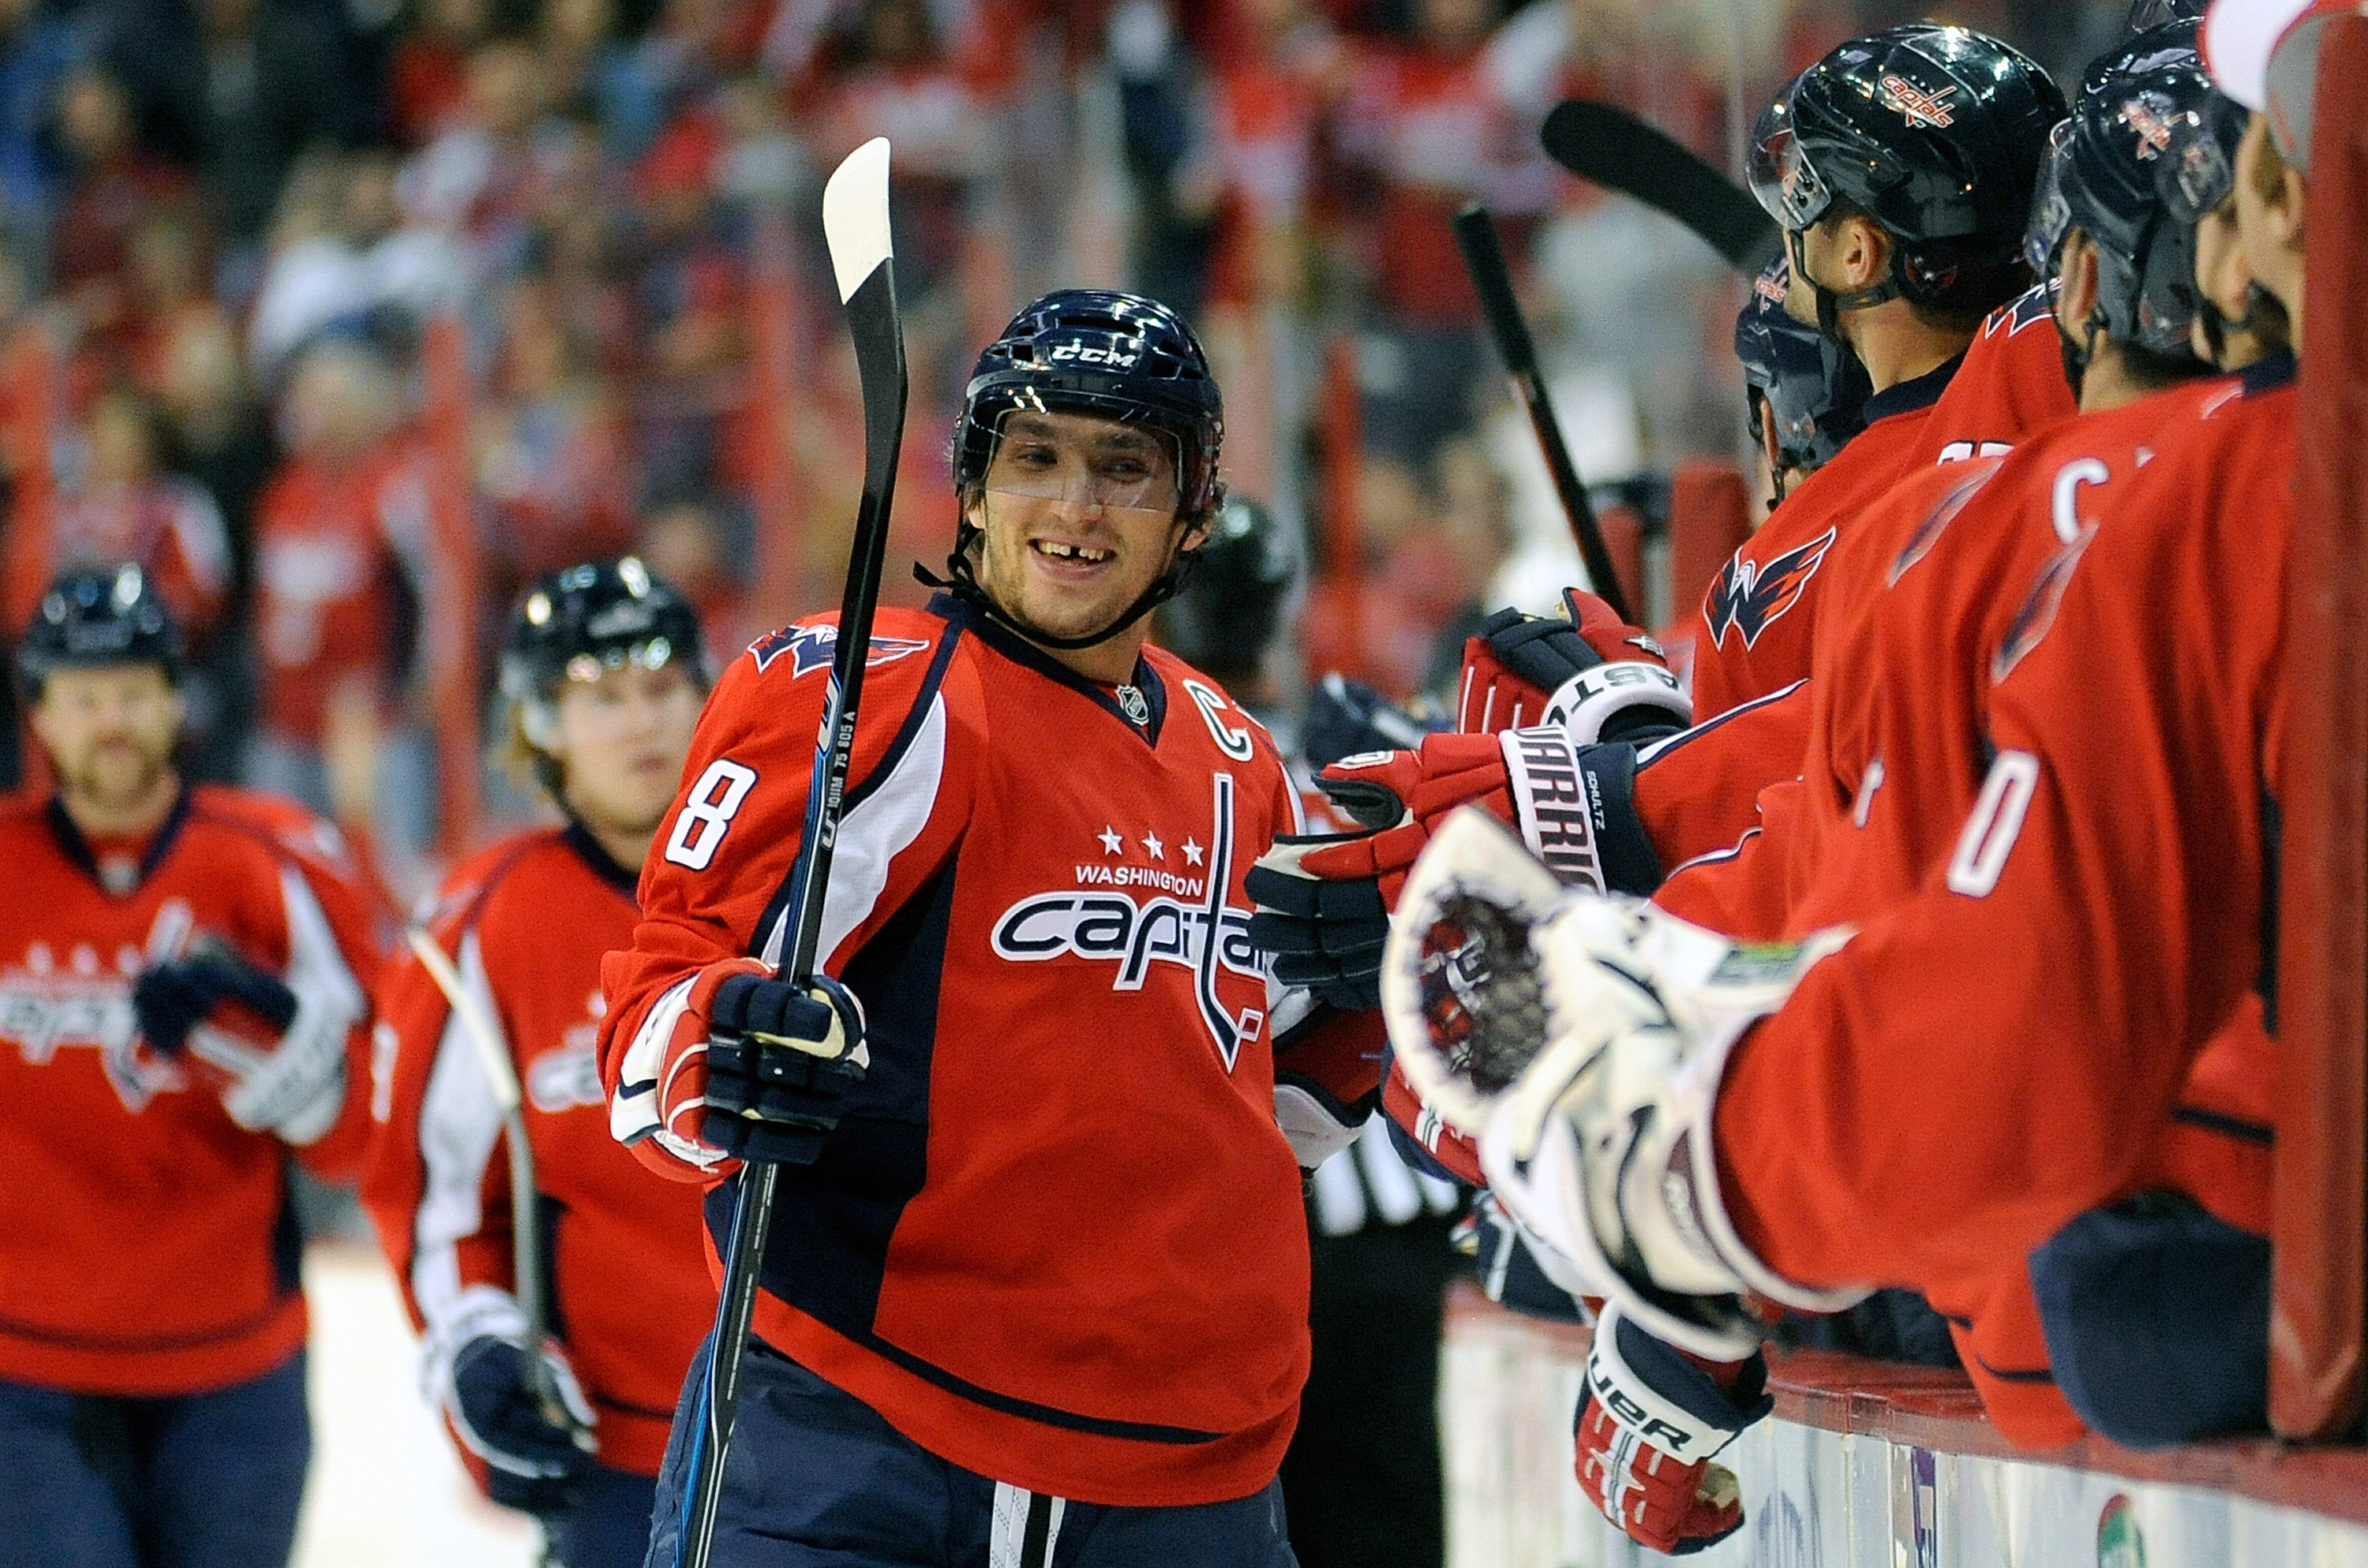 WASHINGTON - NOVEMBER 14:  Alex Ovechkin #8 of the Washington Capitals celebrates with teammates after scoring in the first period against the Atlanta Thrashers at the Verizon Center on November 14, 2010 in Washington, DC.  (Photo by Greg Fiume/Getty Imag